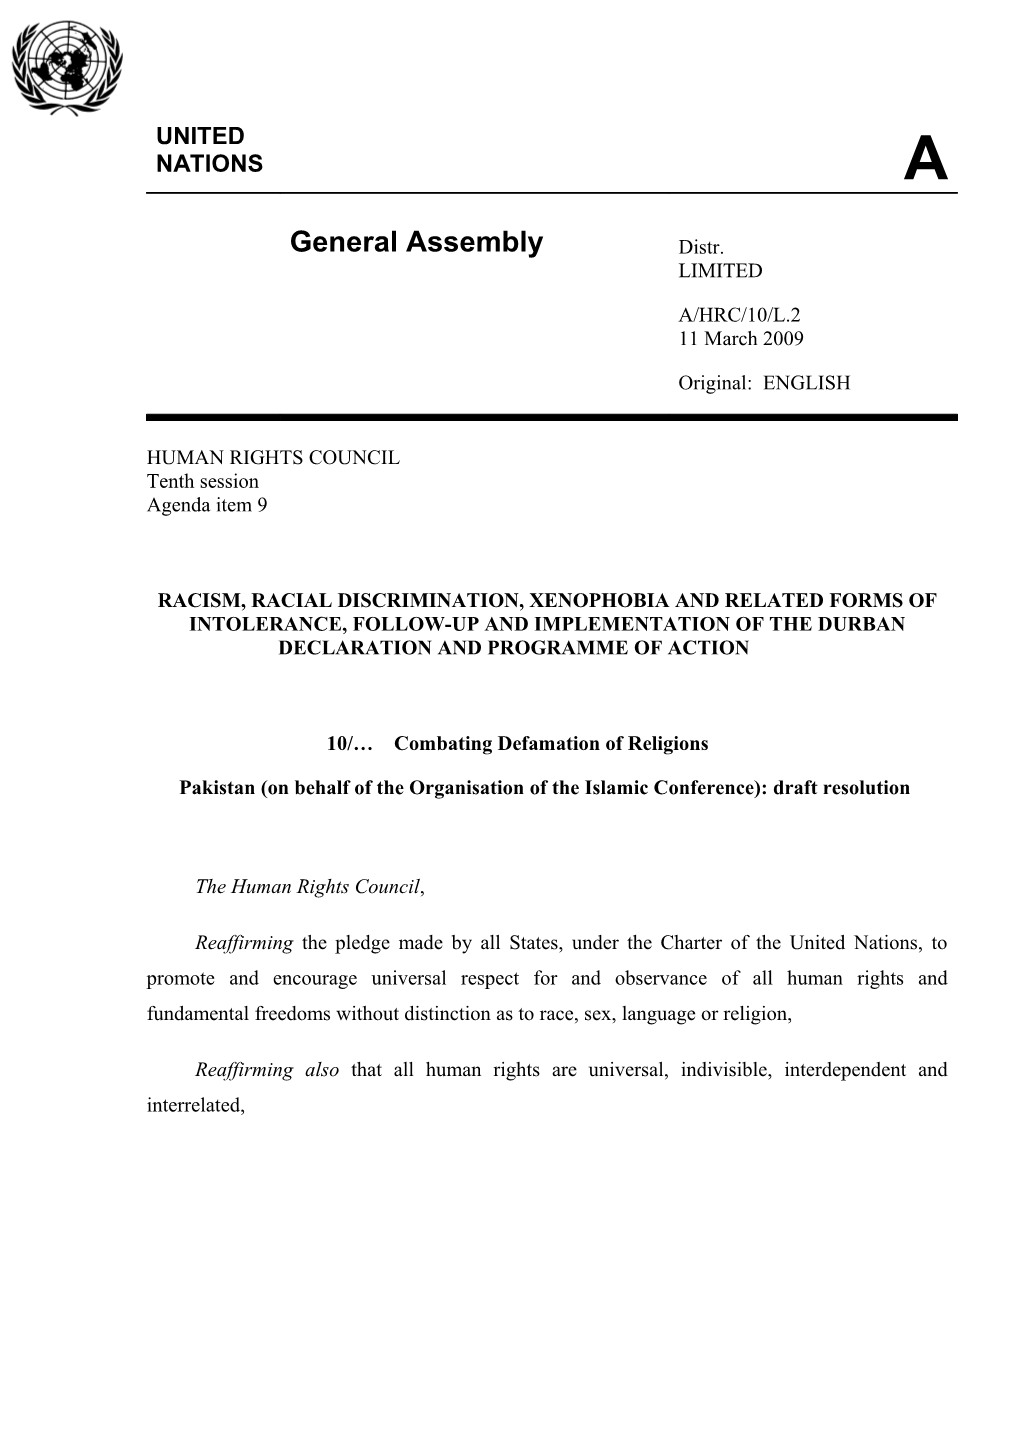 Pakistan (On Behalf of the Organisation of the Islamic Conference): Draft Resolution